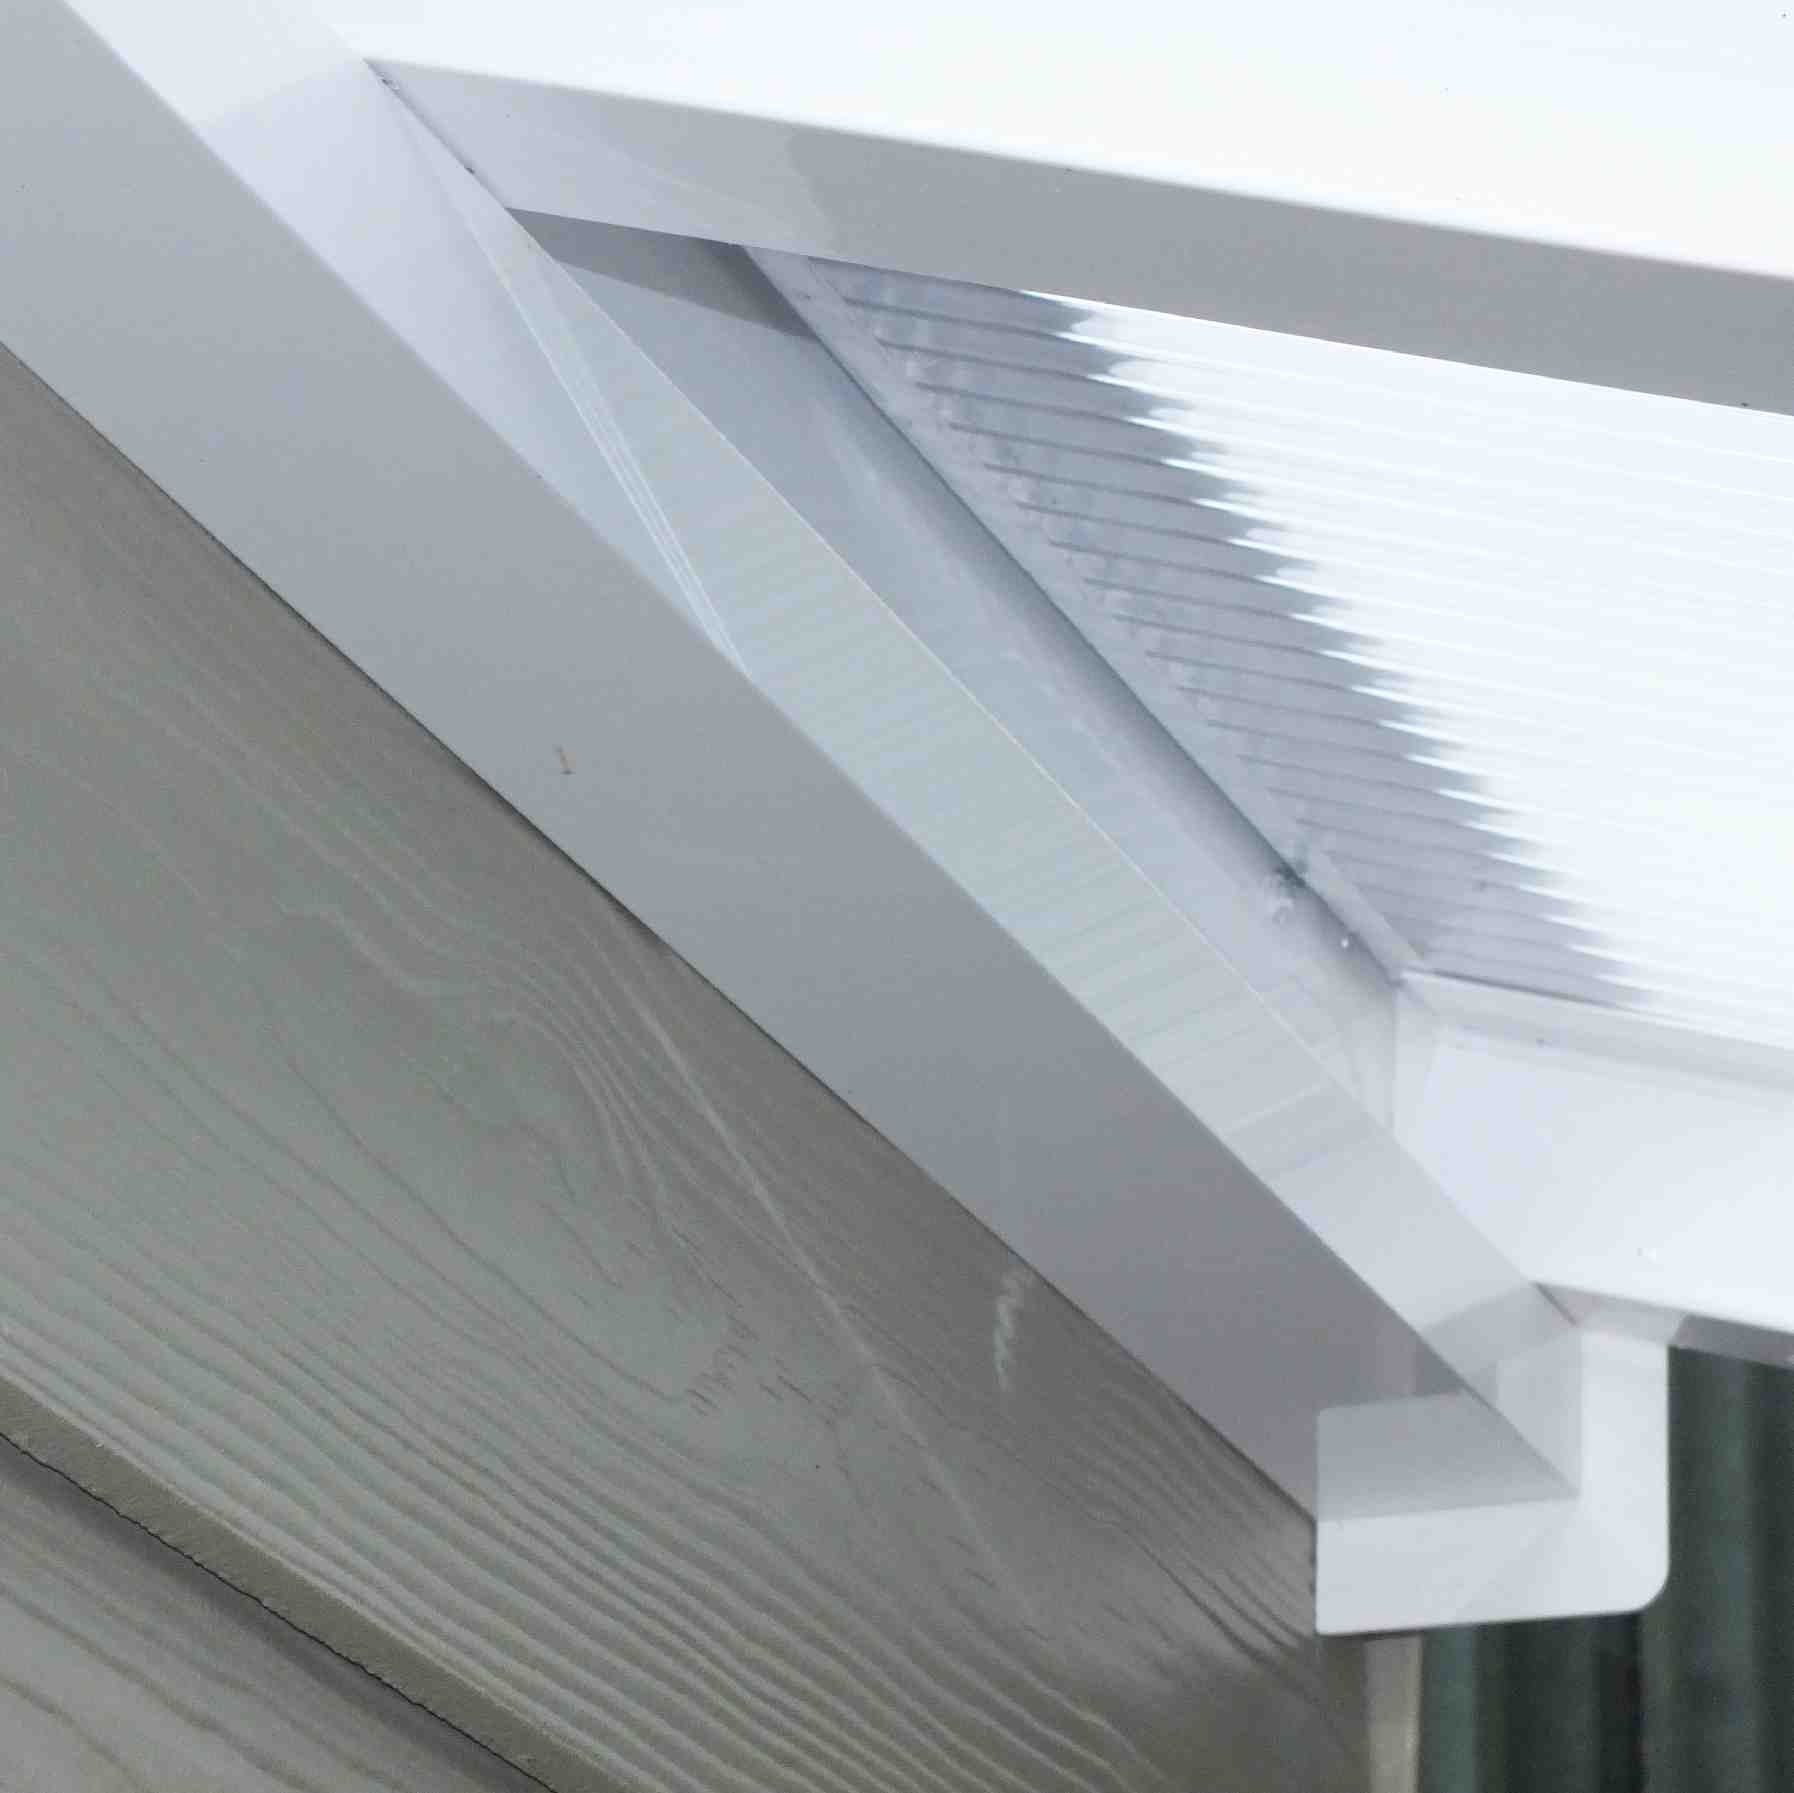 Great deals on Omega Verandah White with 6mm Glass Clear Plate Polycarbonate Glazing - 9.8m (W) x 1.5m (P), (5) Supporting Posts